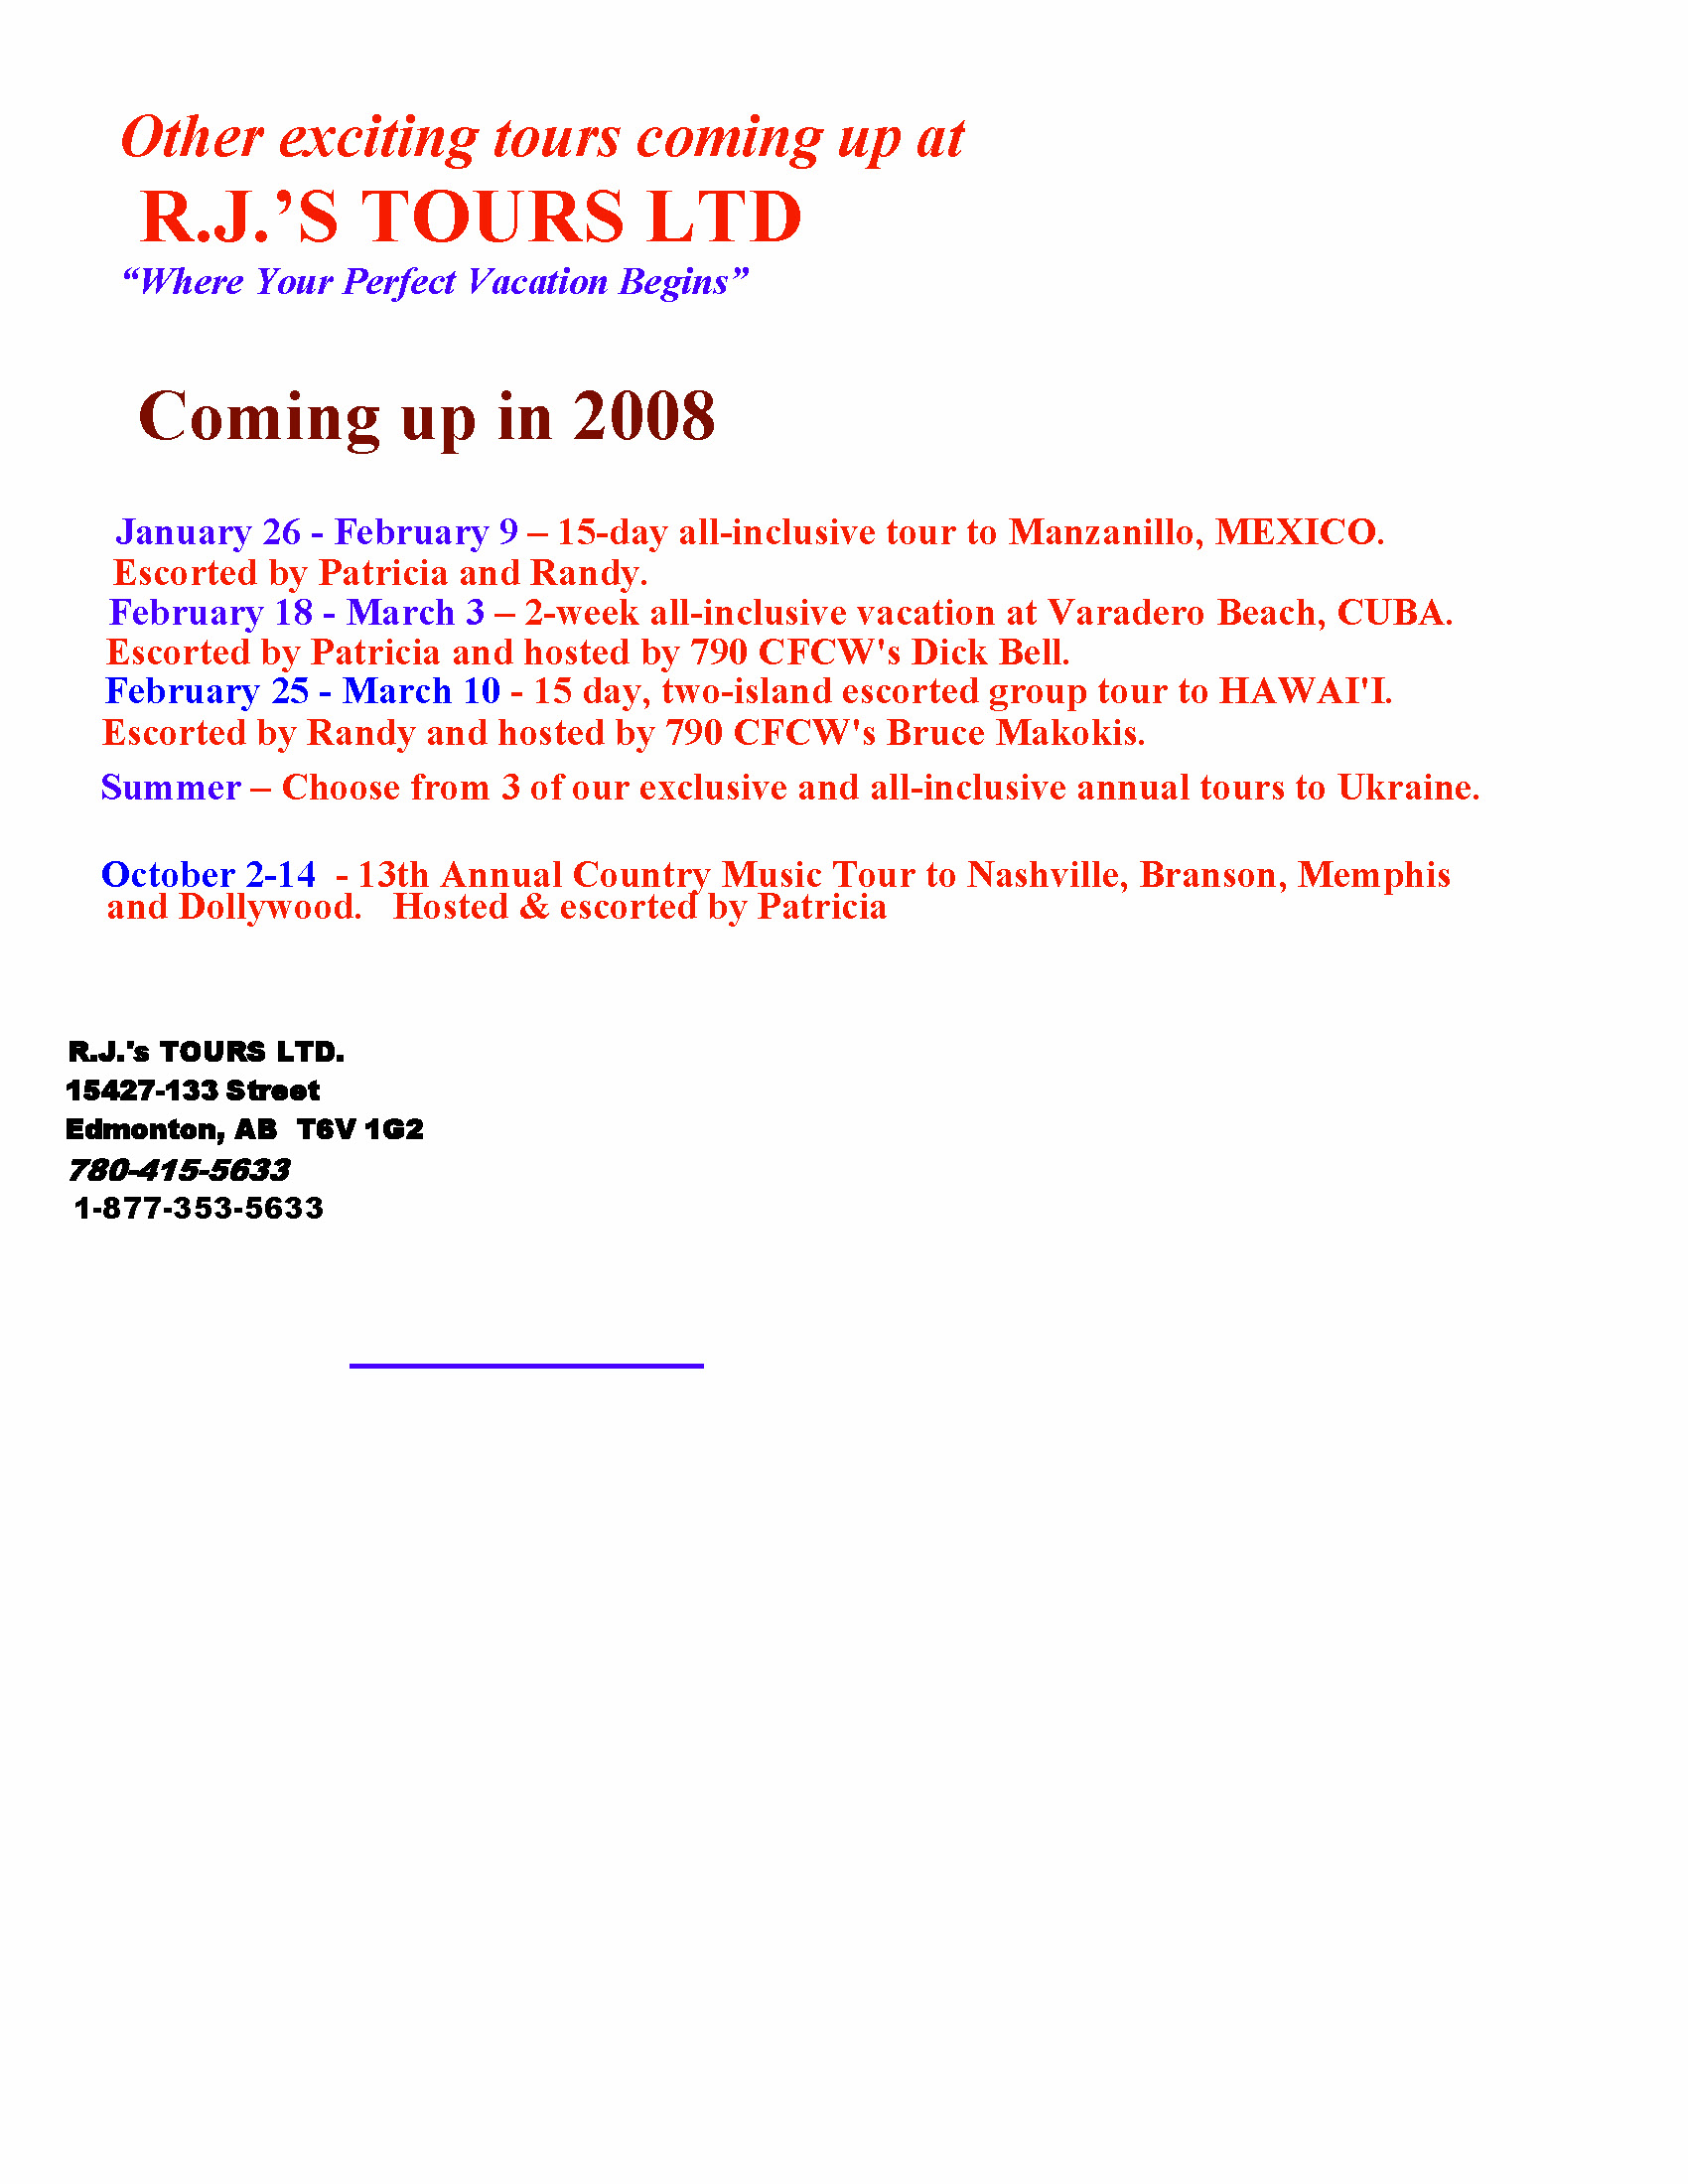 brochure for 2008 tours